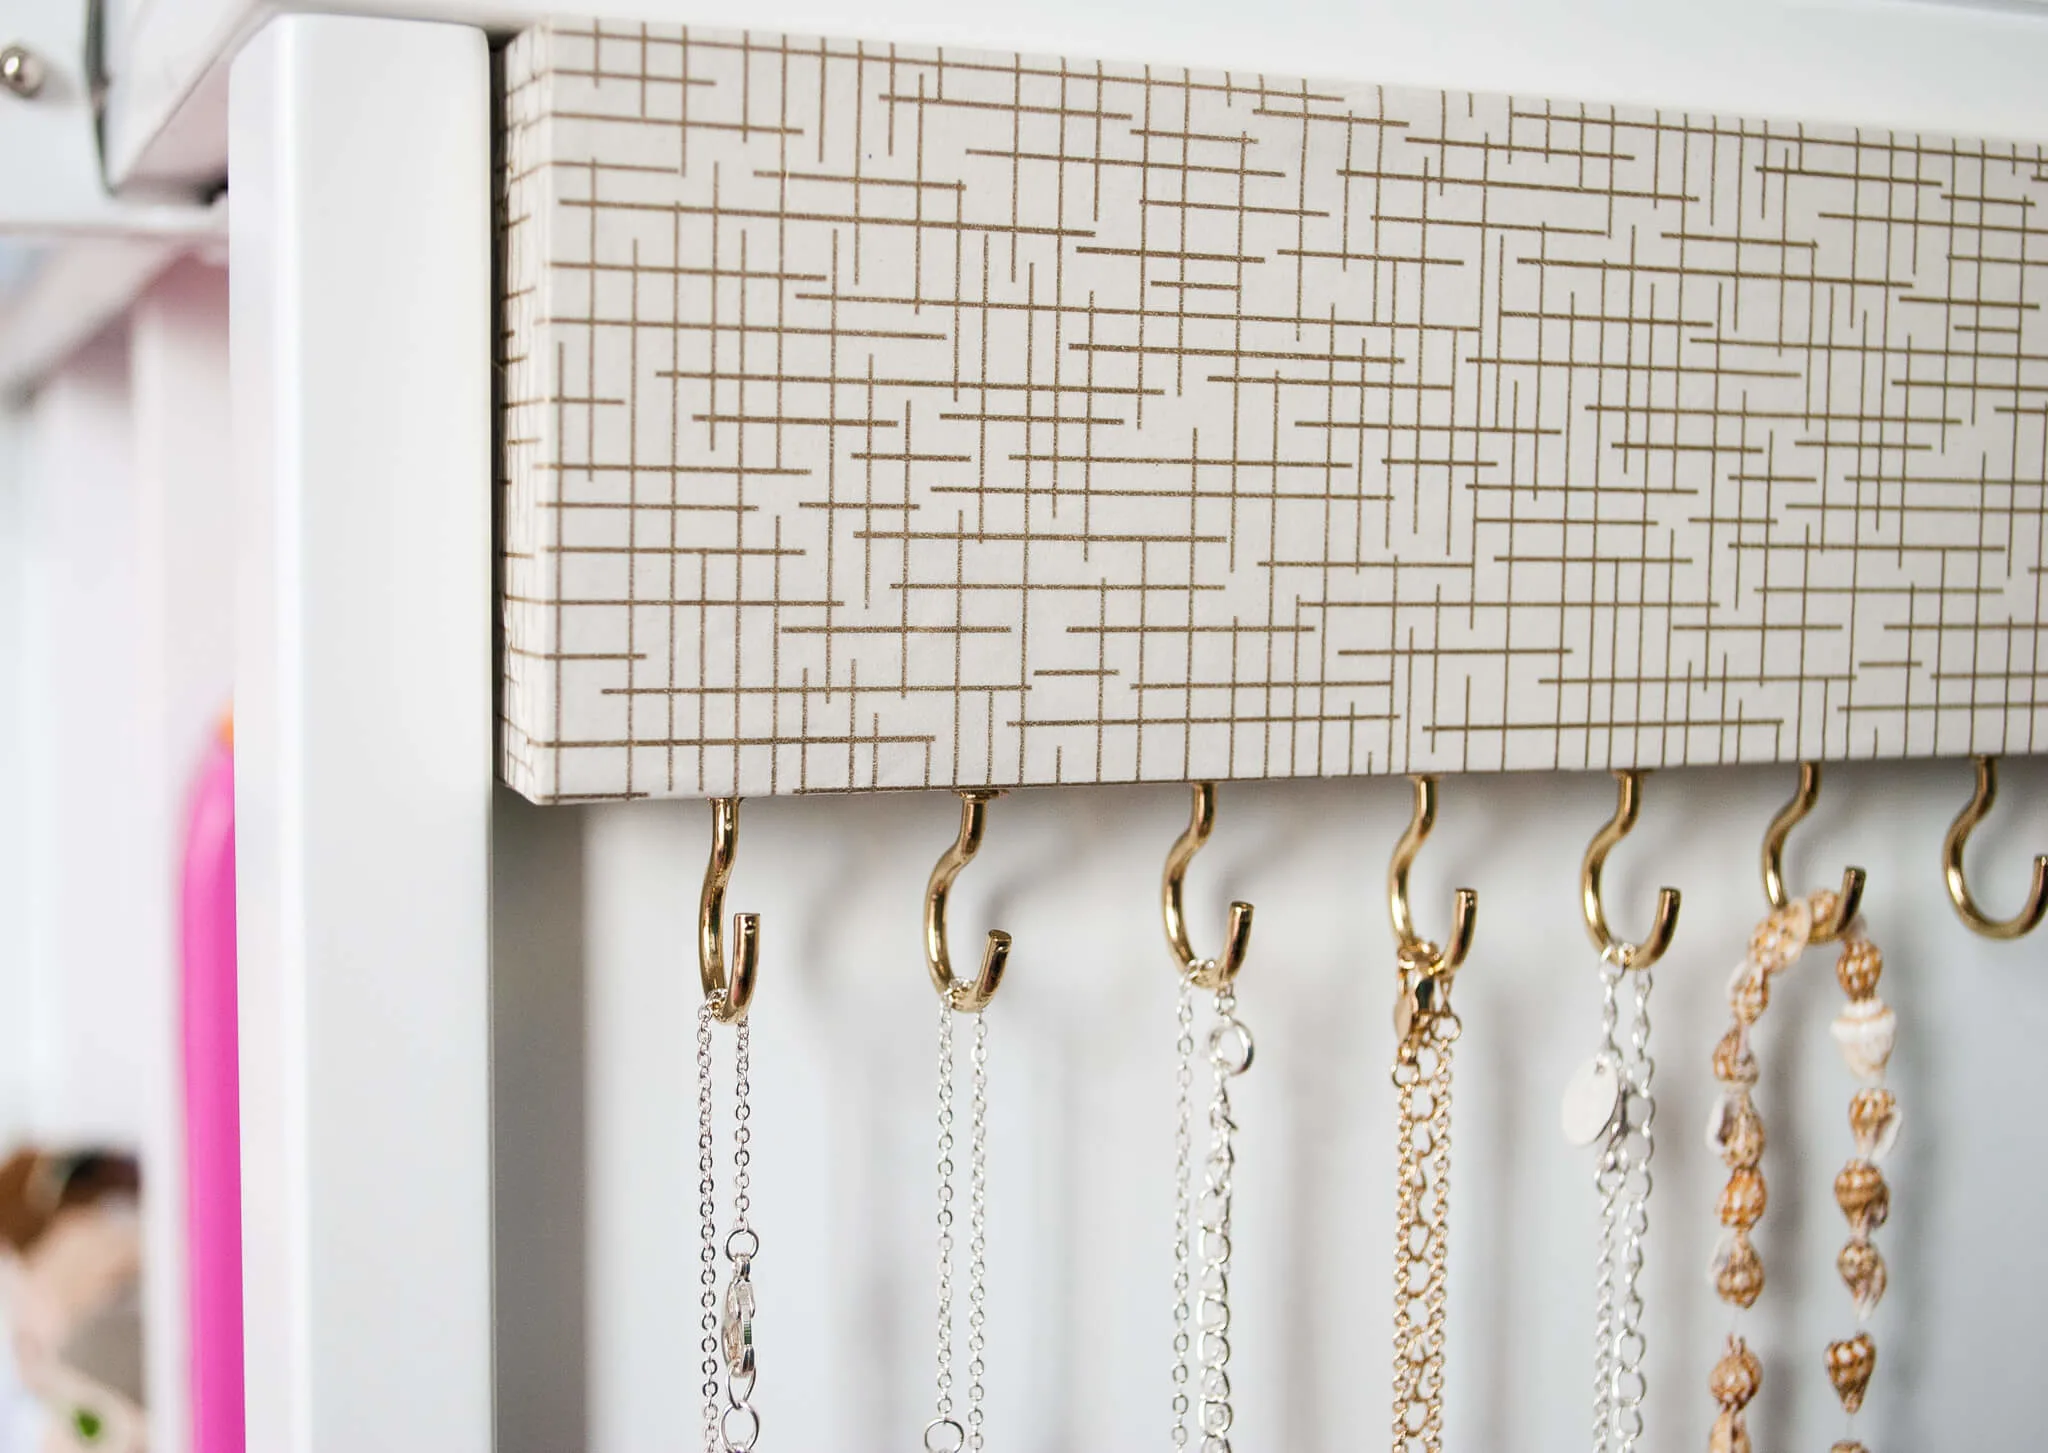 How to make an easy DIY jewelry organizer. Takes just a couple hours to create. No more tangled necklaces!